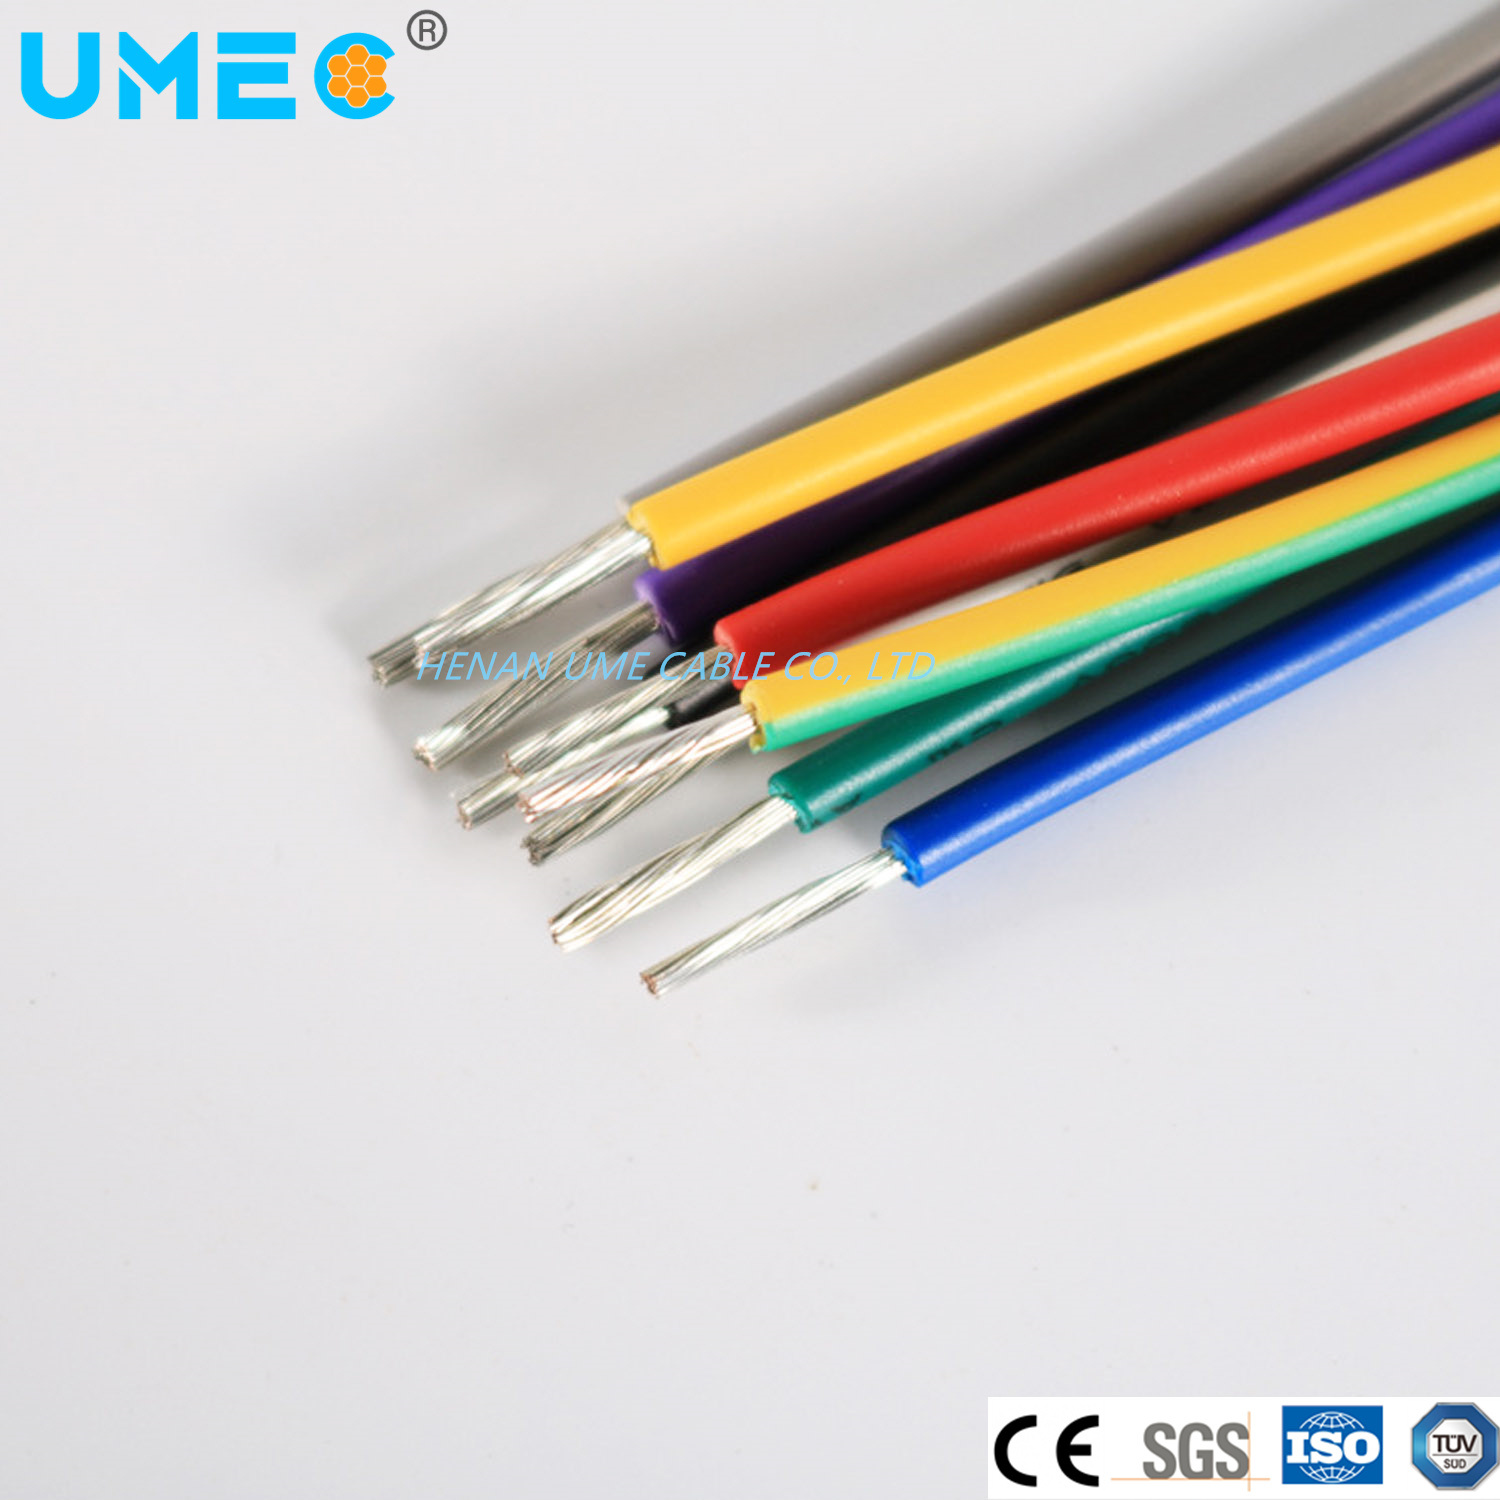 IEC60754 Electric Halogen Free Tinned Copper Silicone Cable Sif Siff 300/500V Heat Resistant Cable Wire